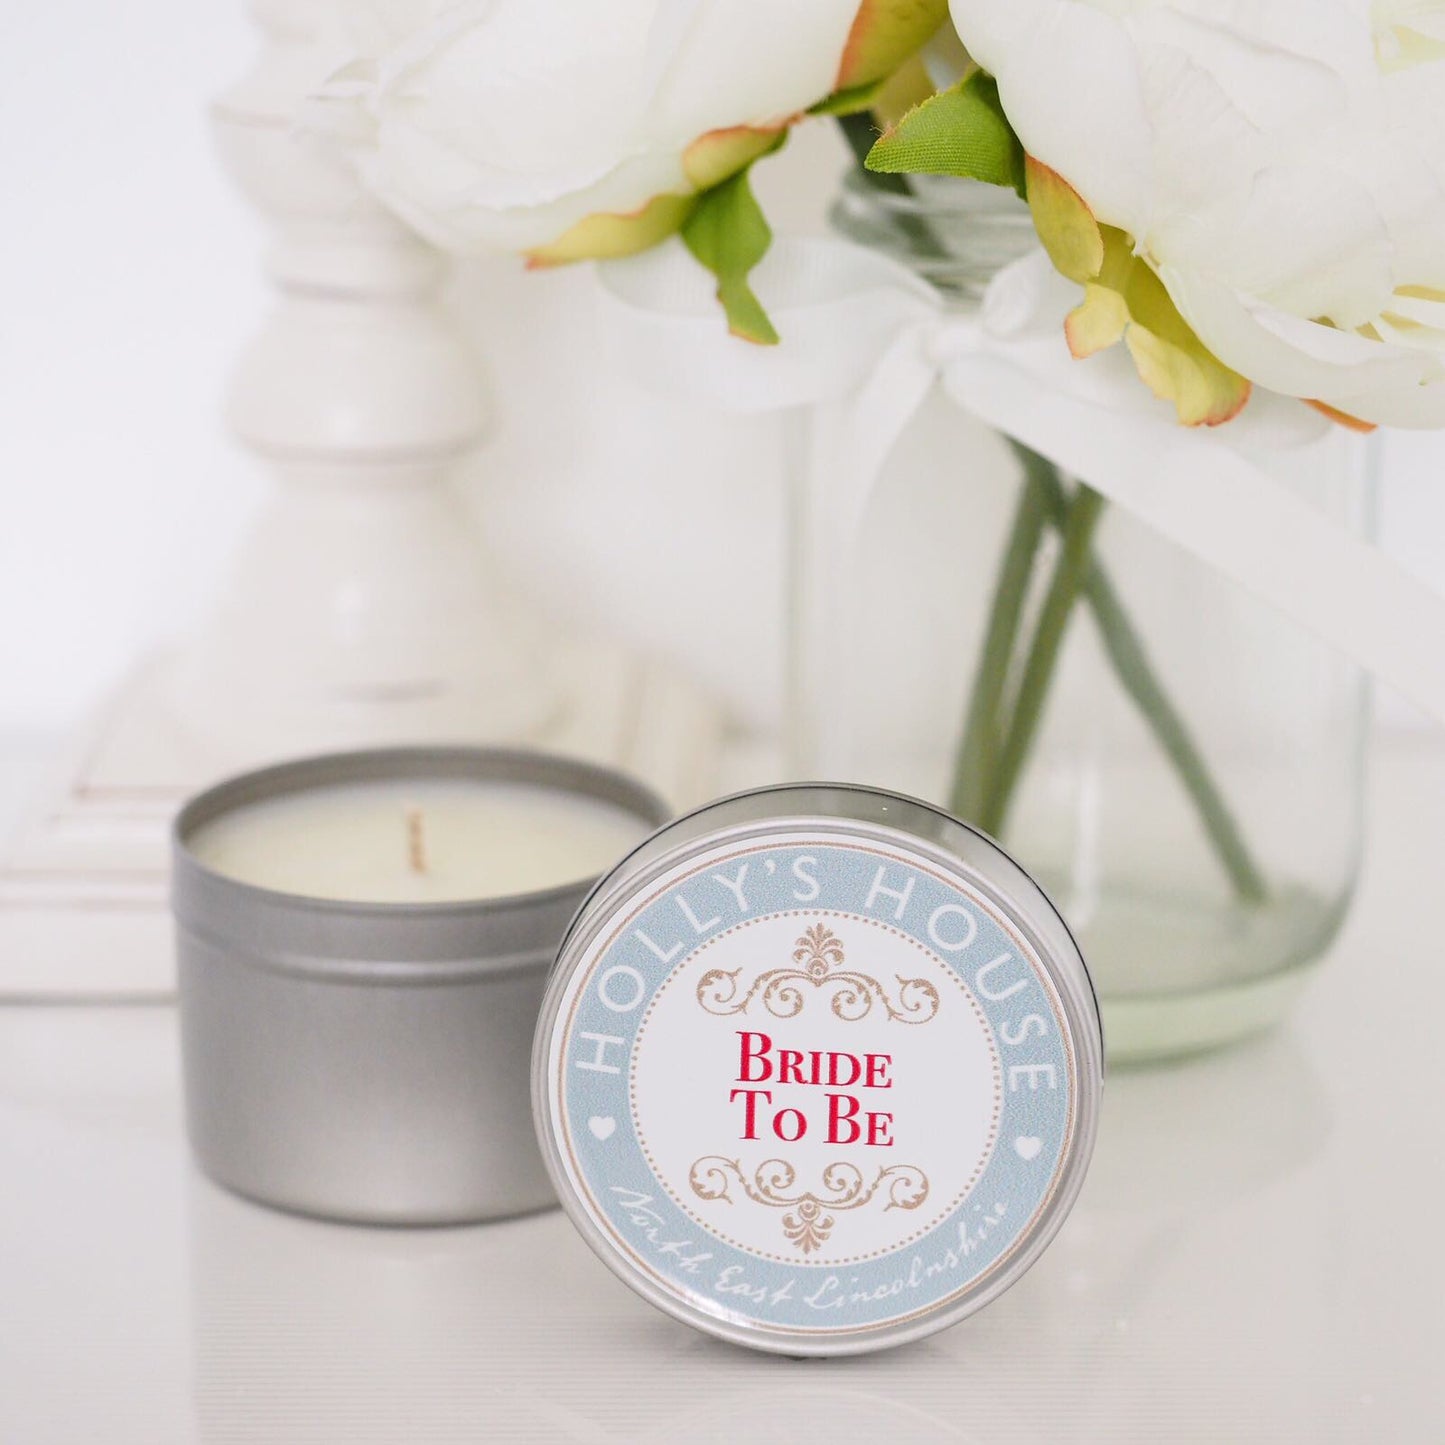 Bride To Be Scented Candle